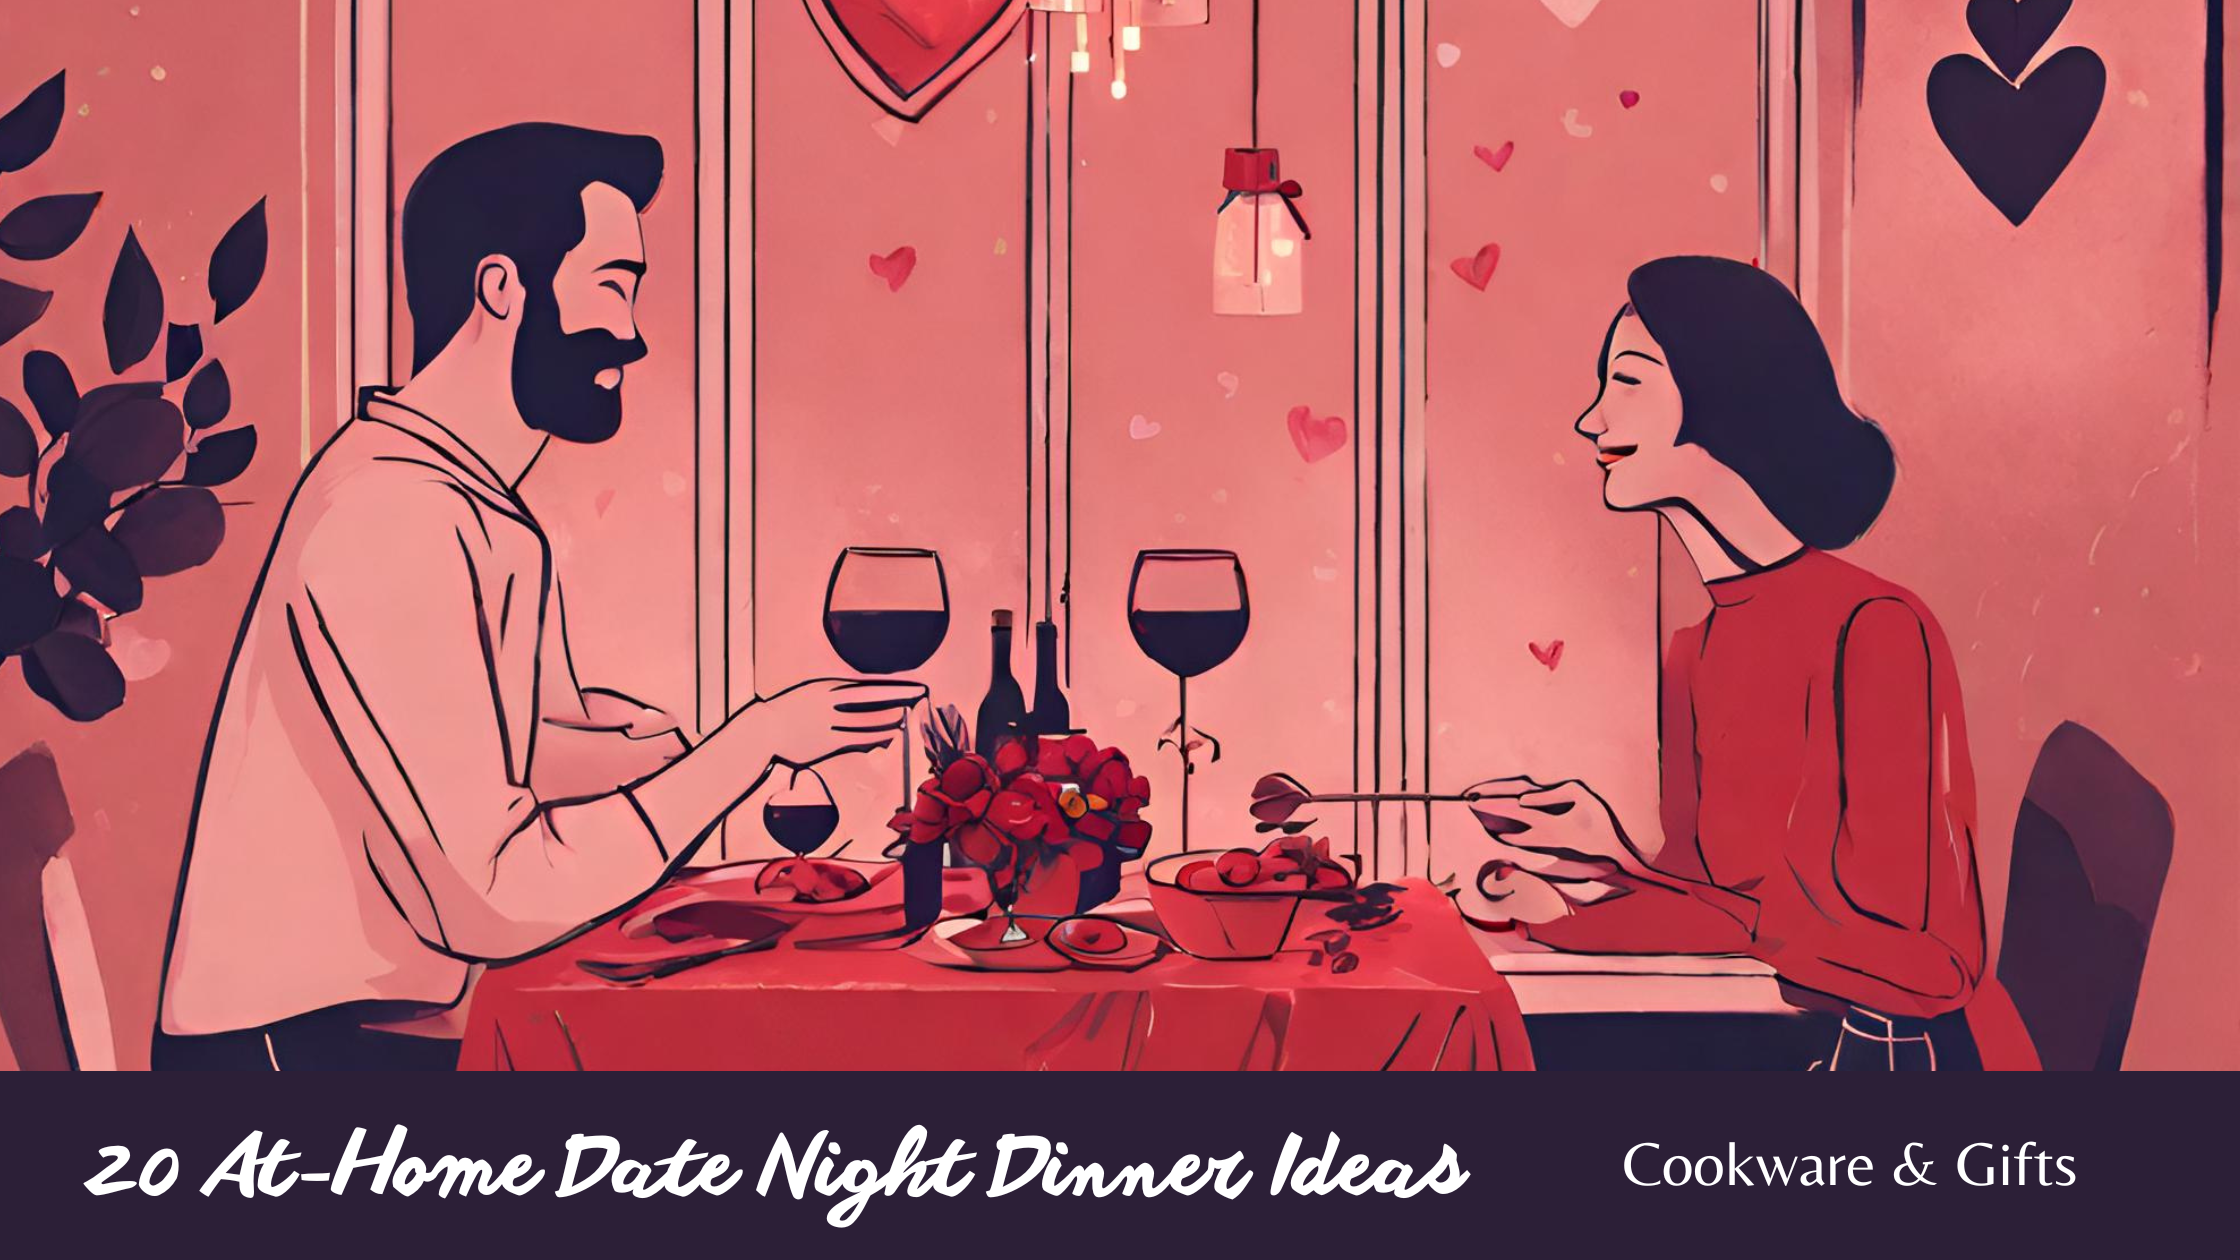 20 Romantic Dinners for an At-Home Date Night for Two